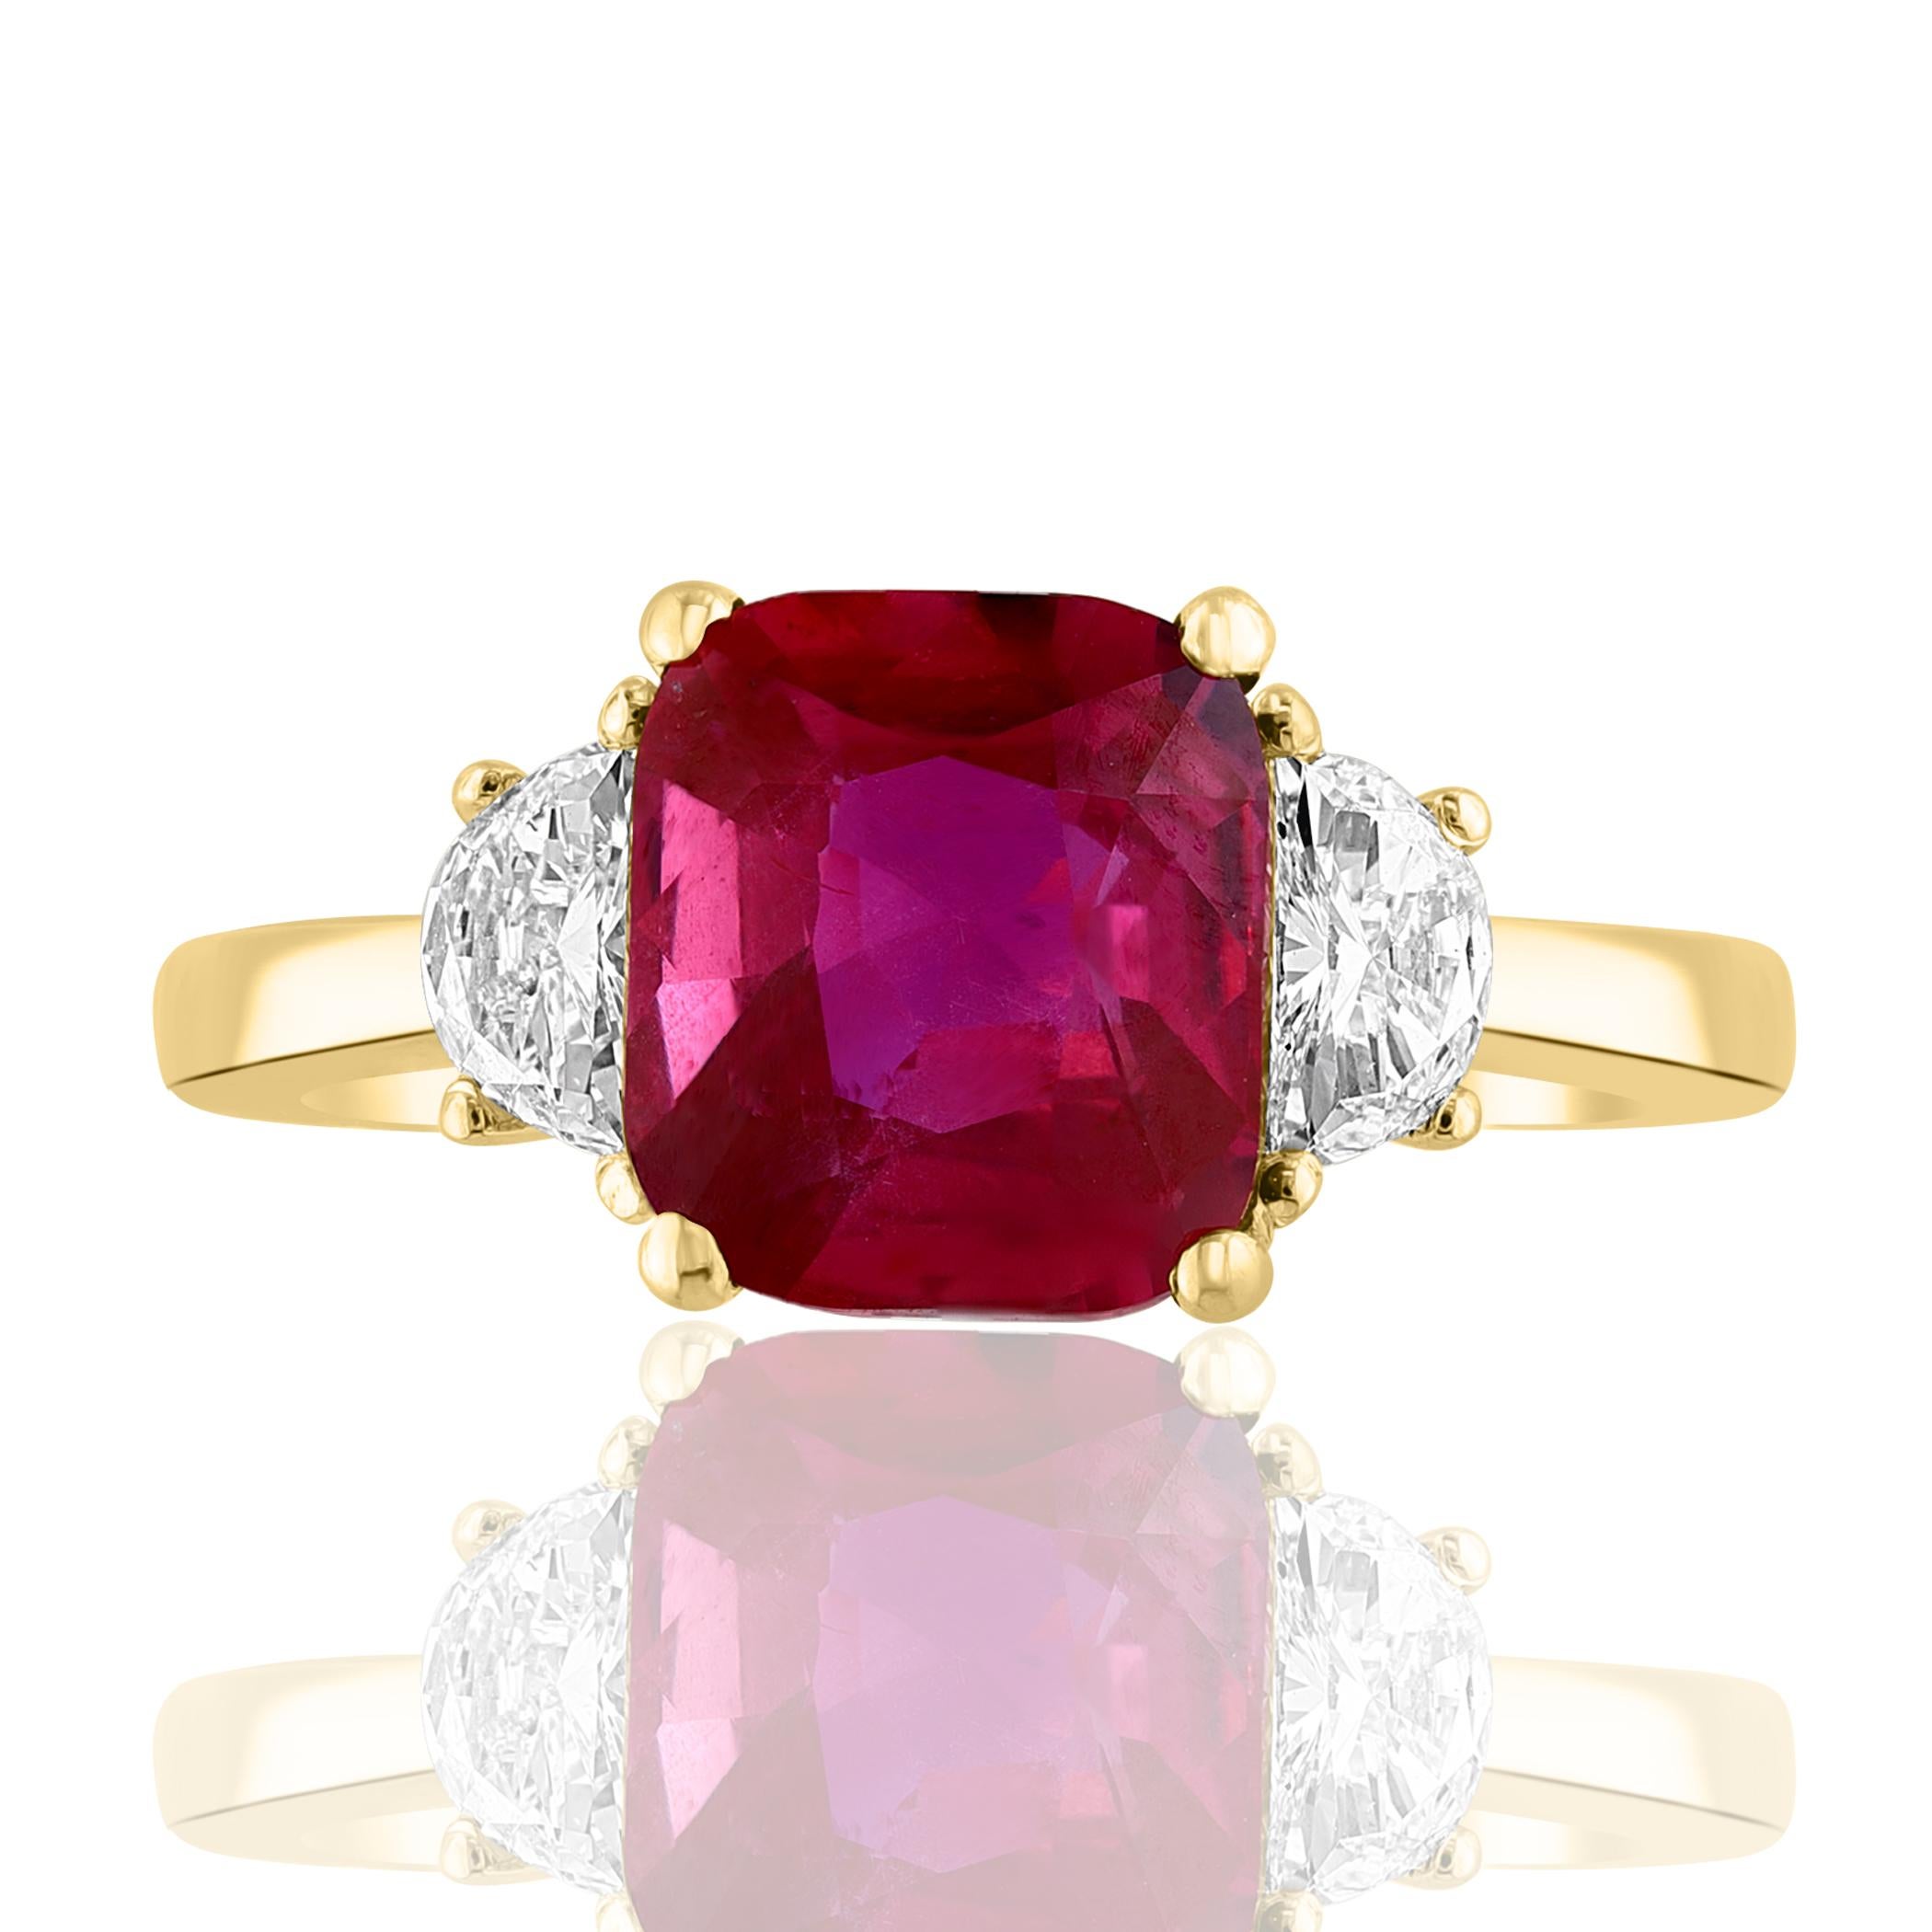 Showcasing Certified Cushion cut, Vibrant color Ruby weighing 3.07 carats, flanked by two brilliant cut half moon diamonds weighing 0.60 carats total. Elegantly set in a polished 18K yellow gold composition.